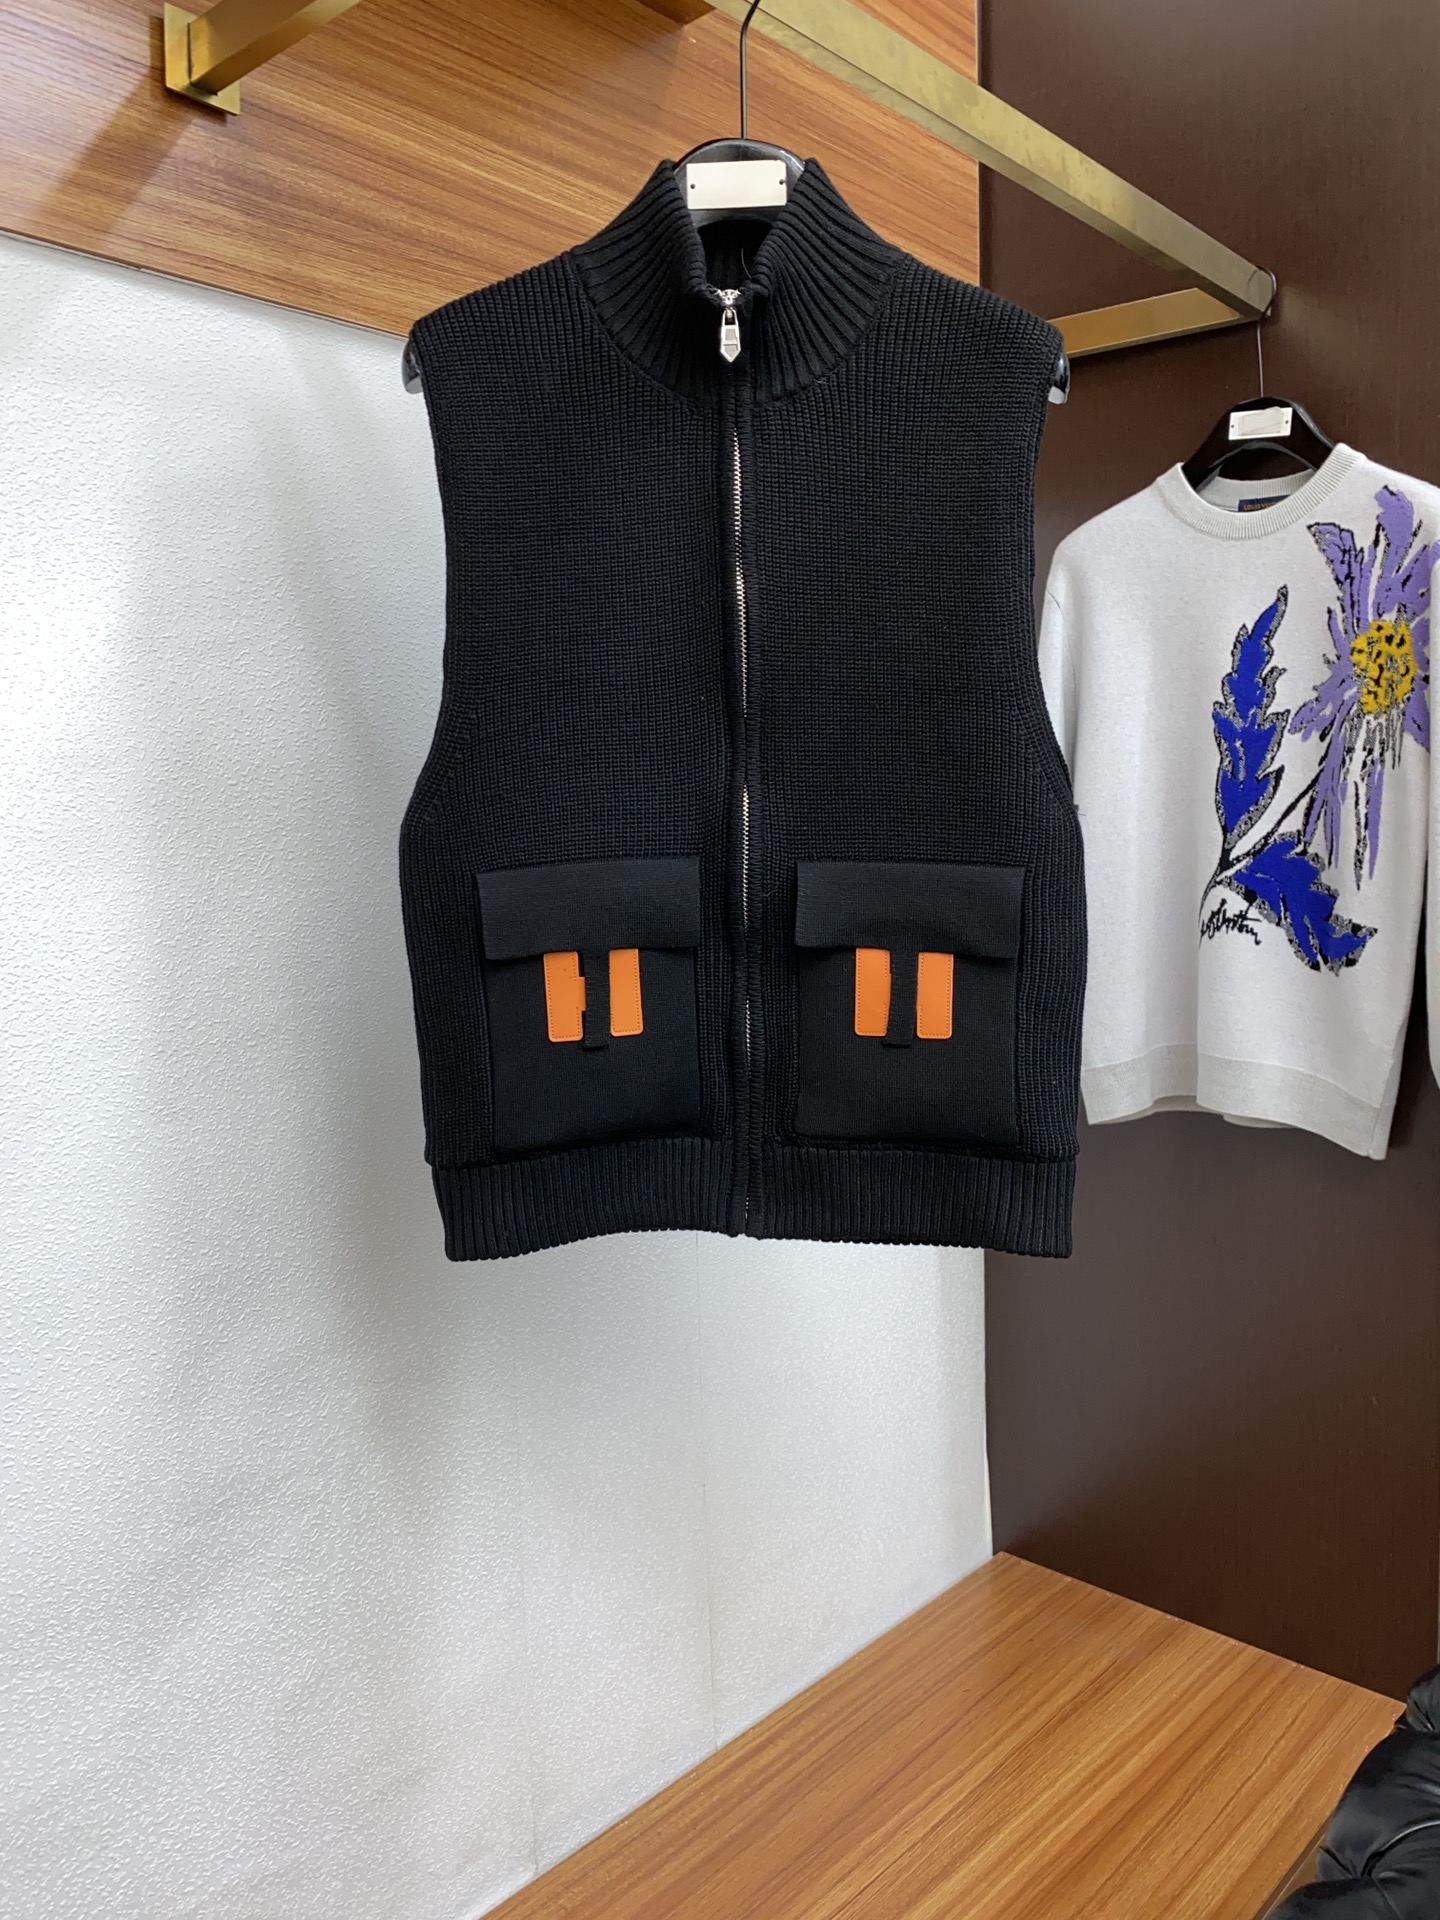 Hermes Wholesale Clothing Waistcoats Embroidery Cashmere Knitting Wool Fall/Winter Collection